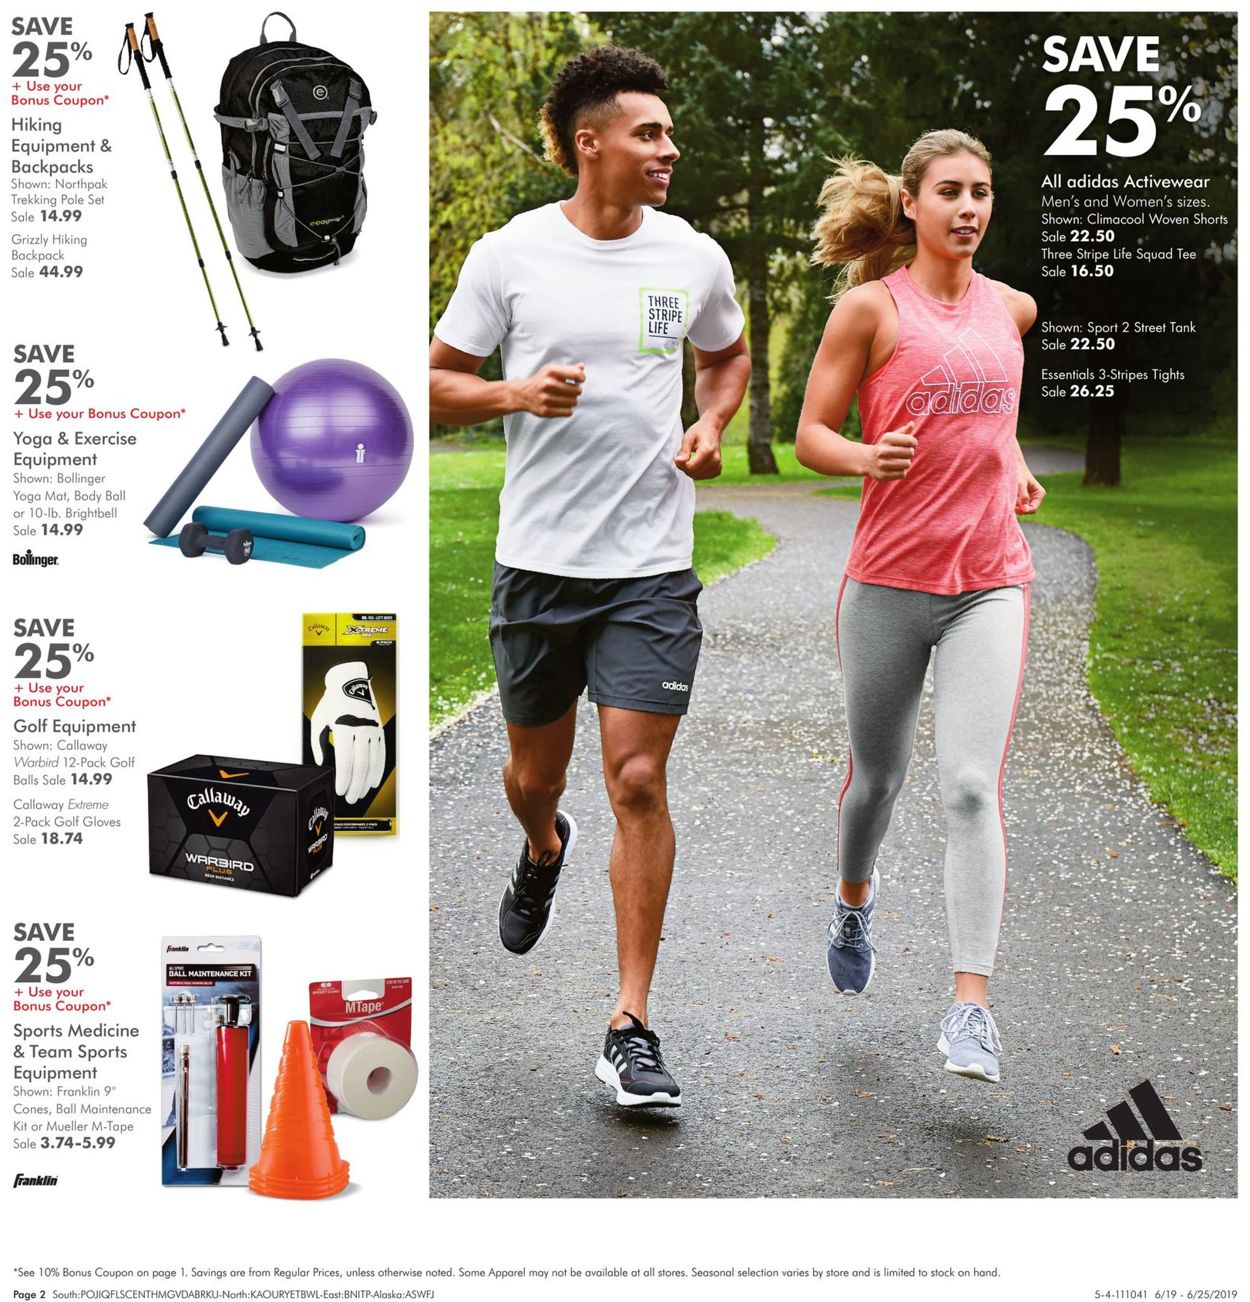 Fred Meyer Weekly Ad Circular - valid 06/19-06/25/2019 (Page 2)